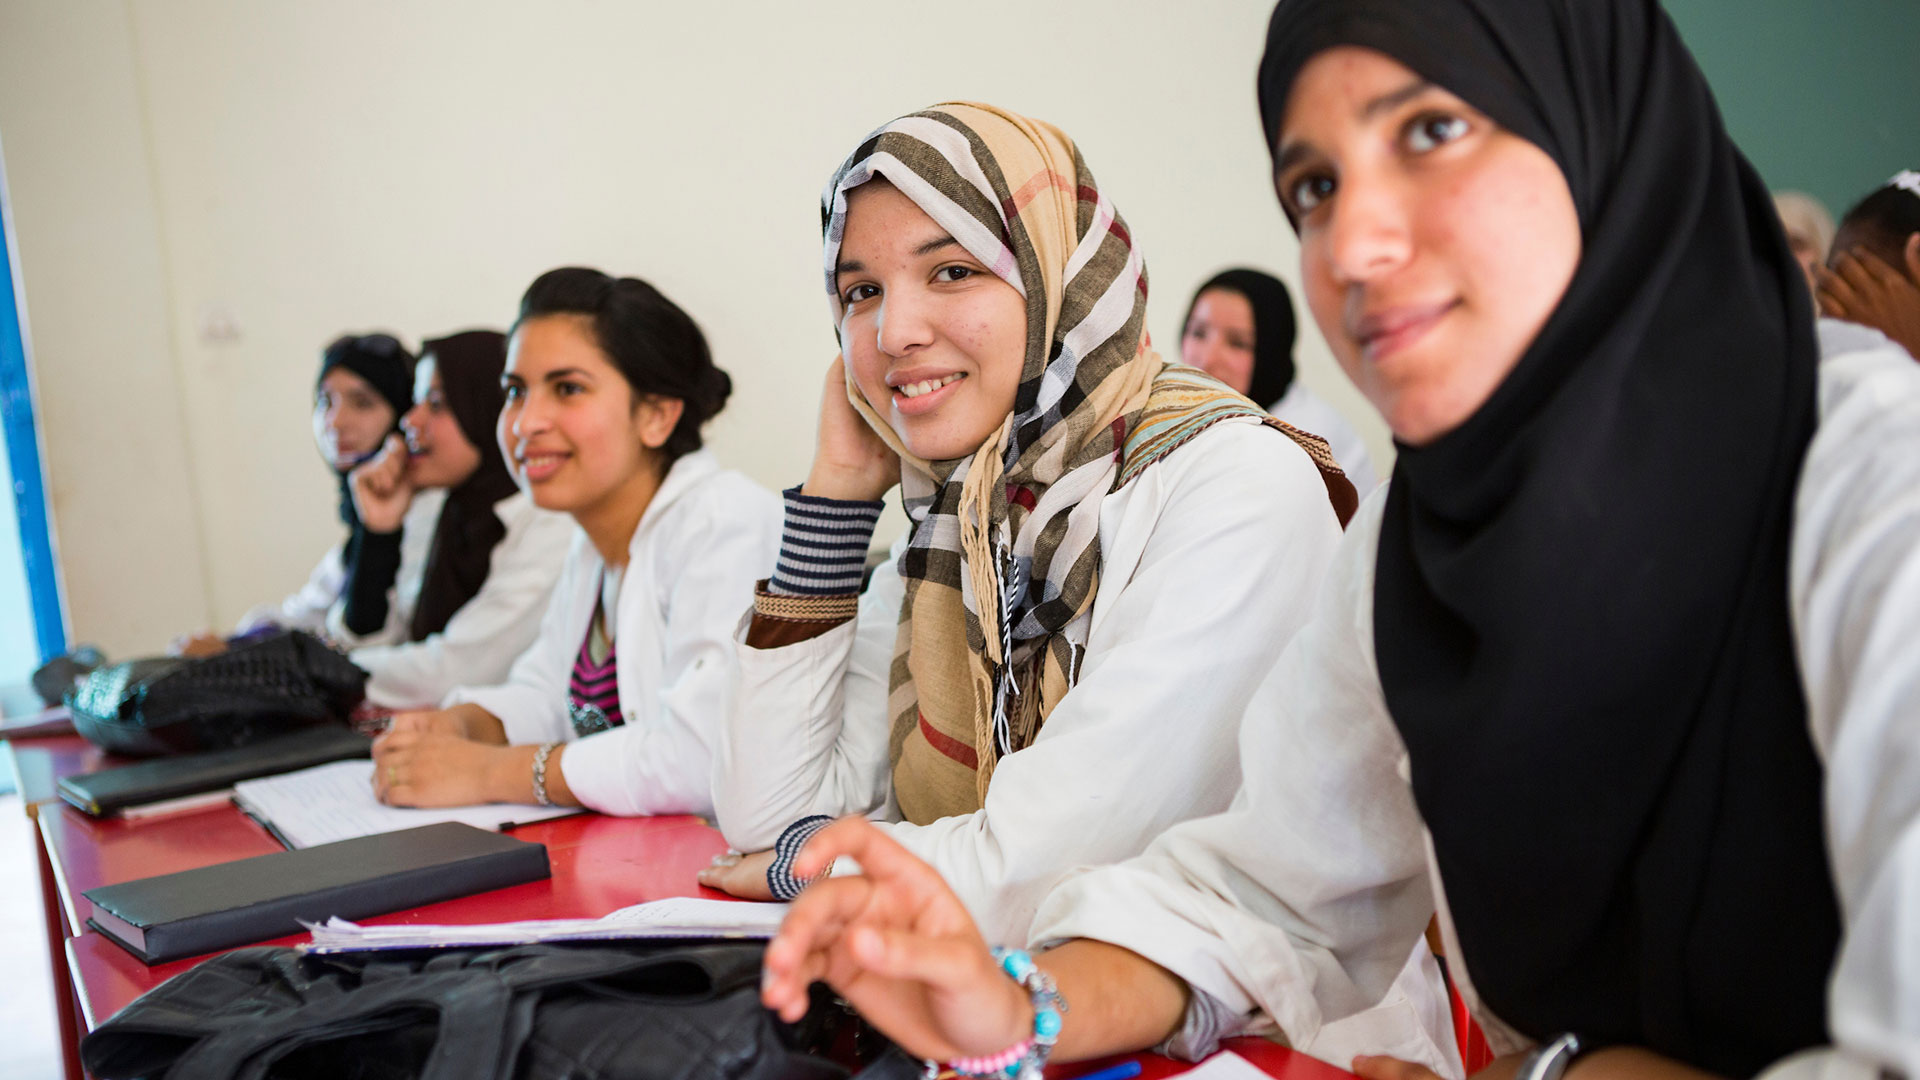 Women attend a vocational training class in Agadir, Morocco. September, 2019. IMF Photo/Jake Lyell